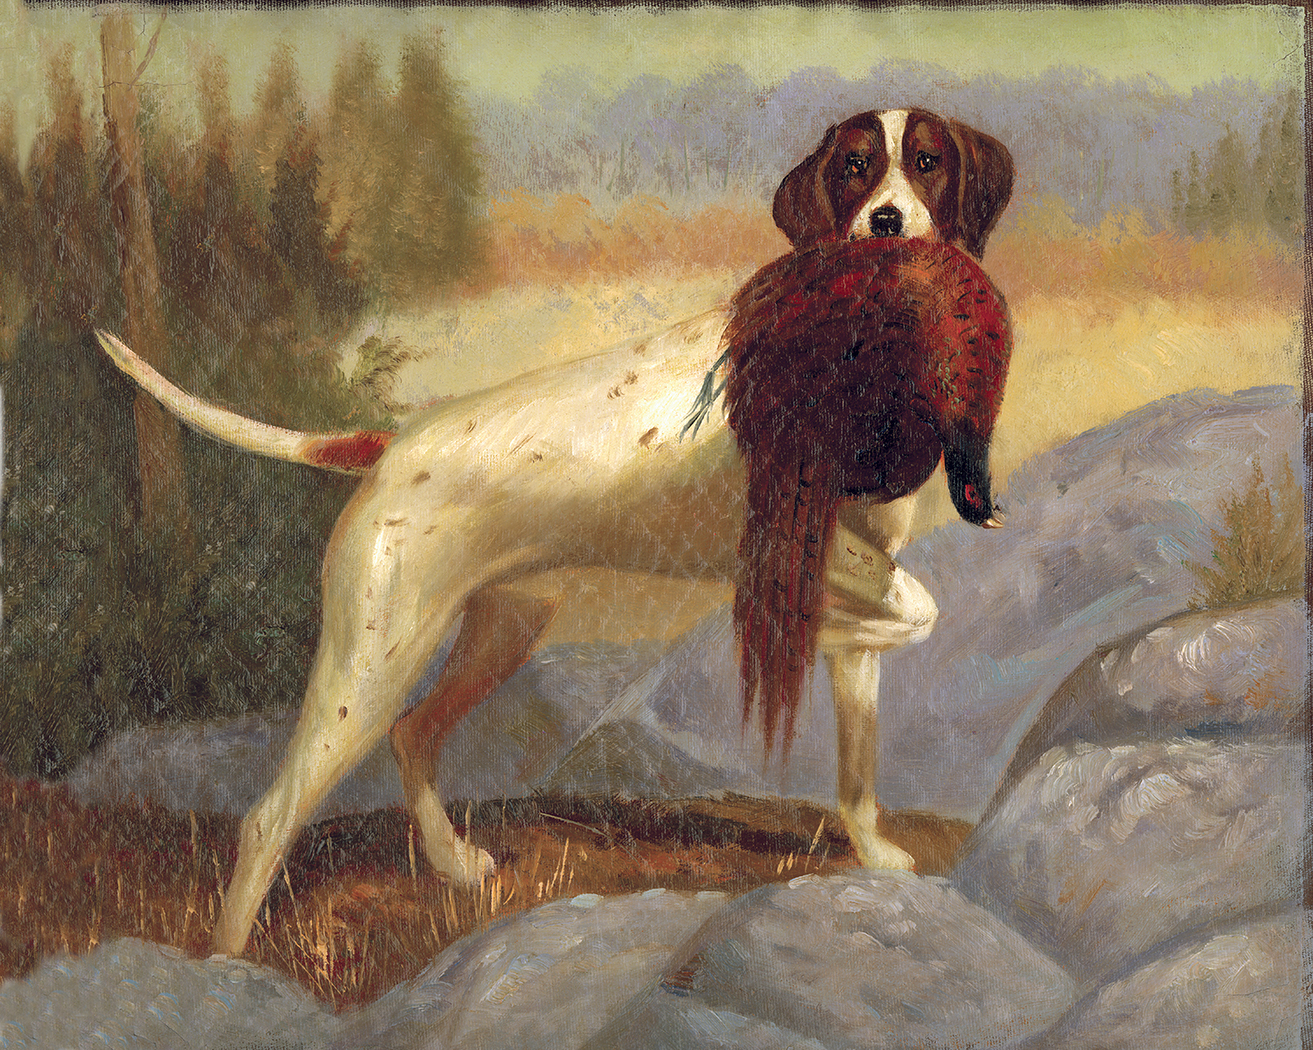 Cabin/Lodge Dogs Pointer with Pheasant Painting Reproduction Print on Canvas